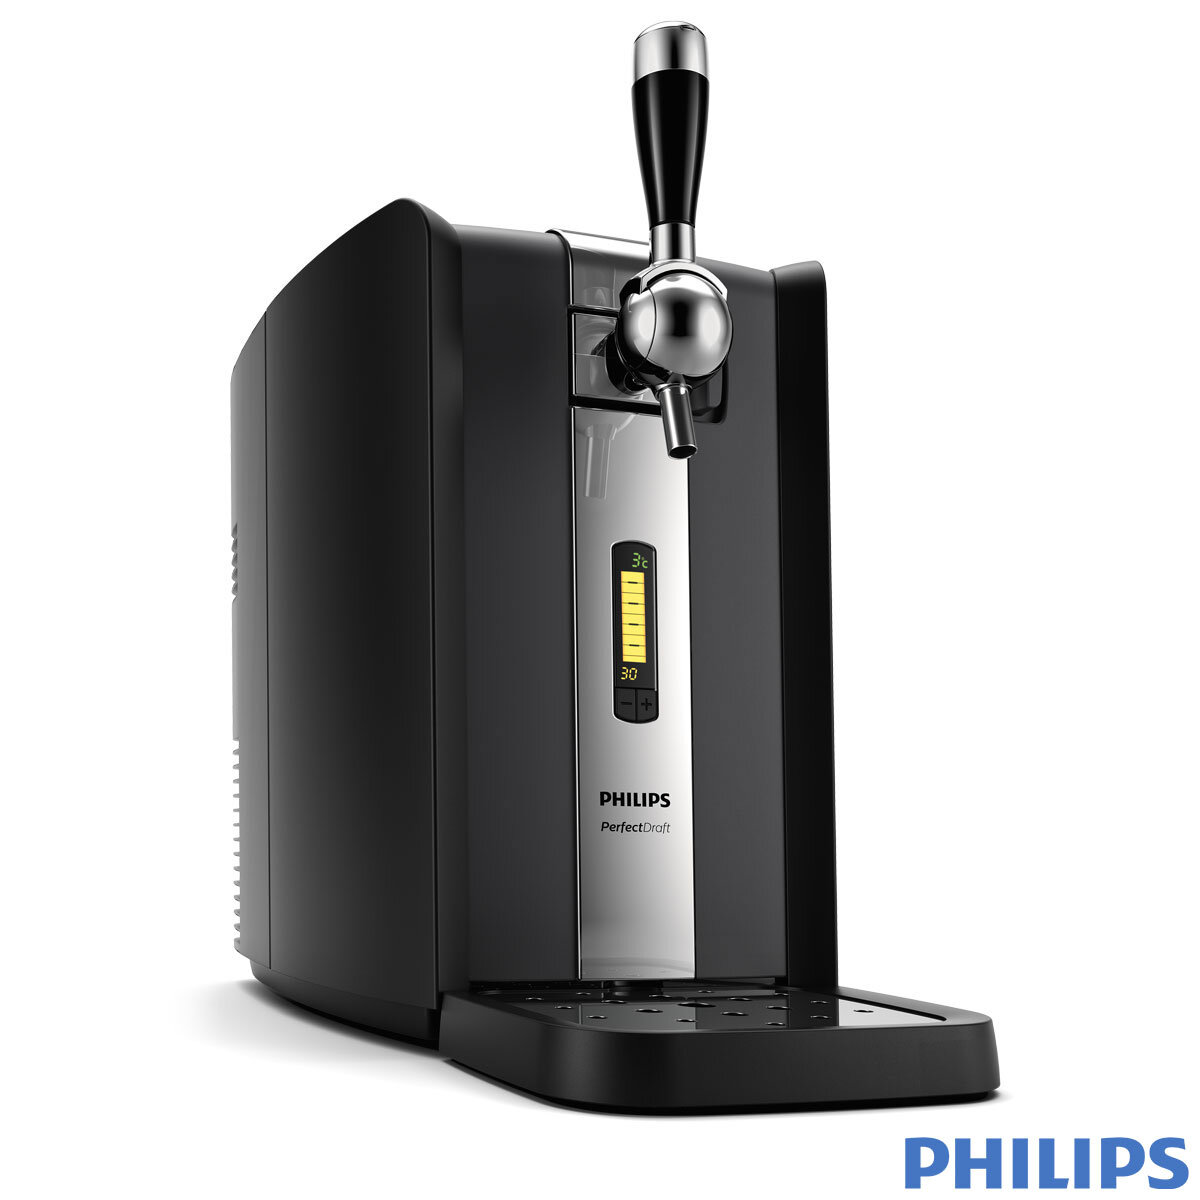 Image of Philips Perfect draft